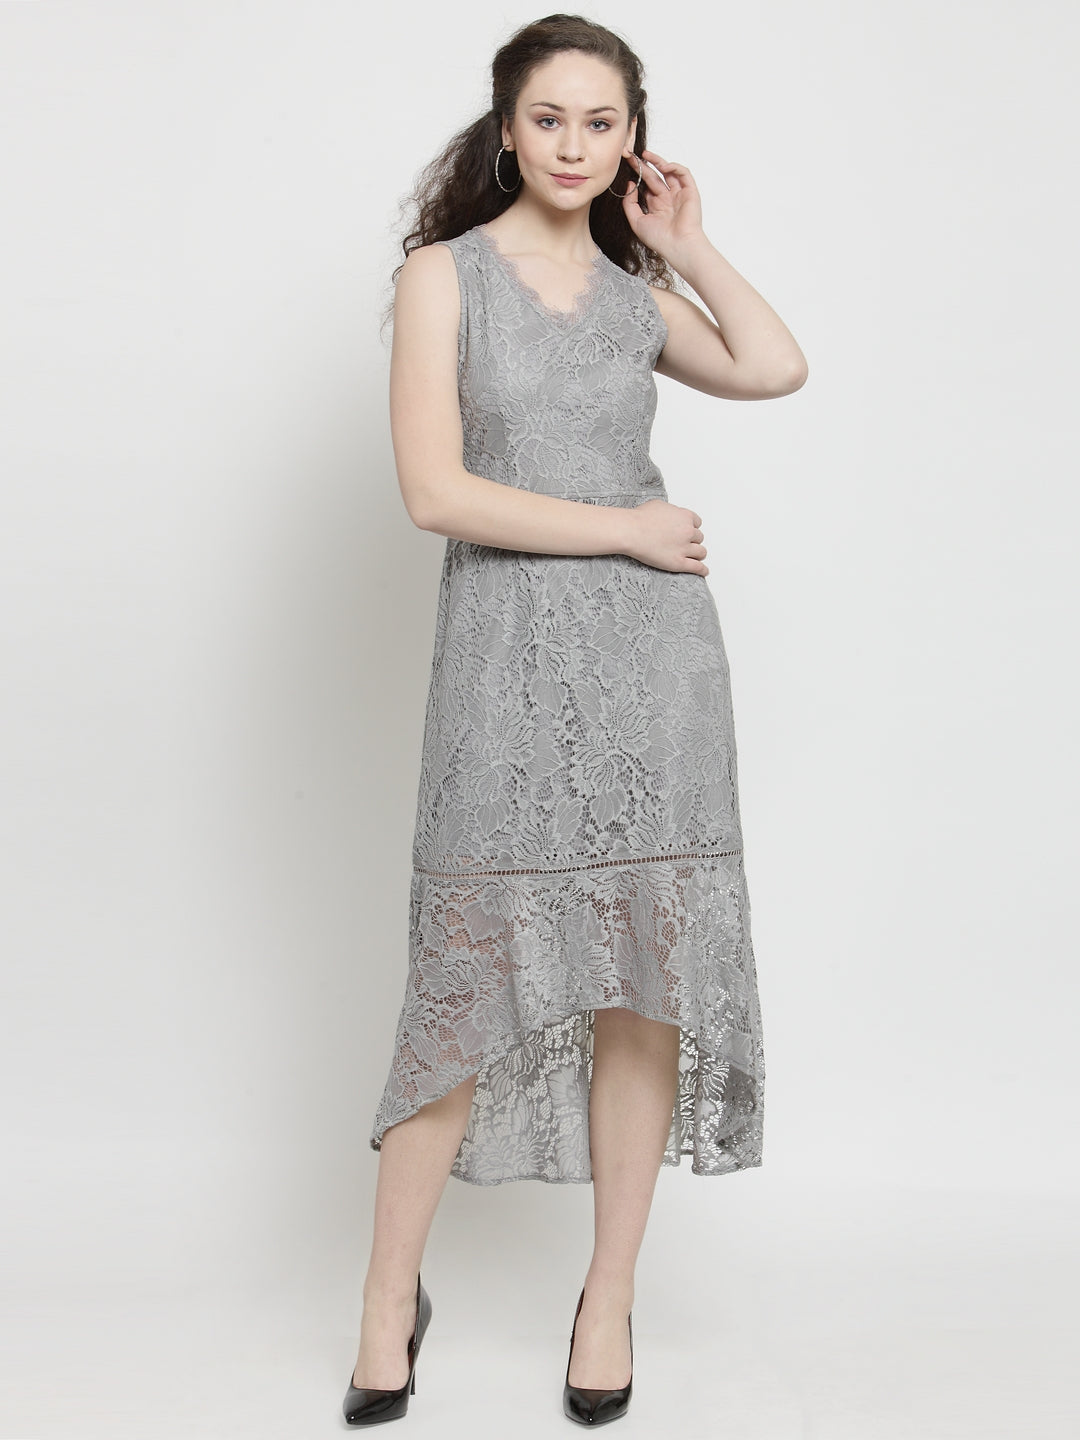 Lace Dress With High Low Hem & Side Zip